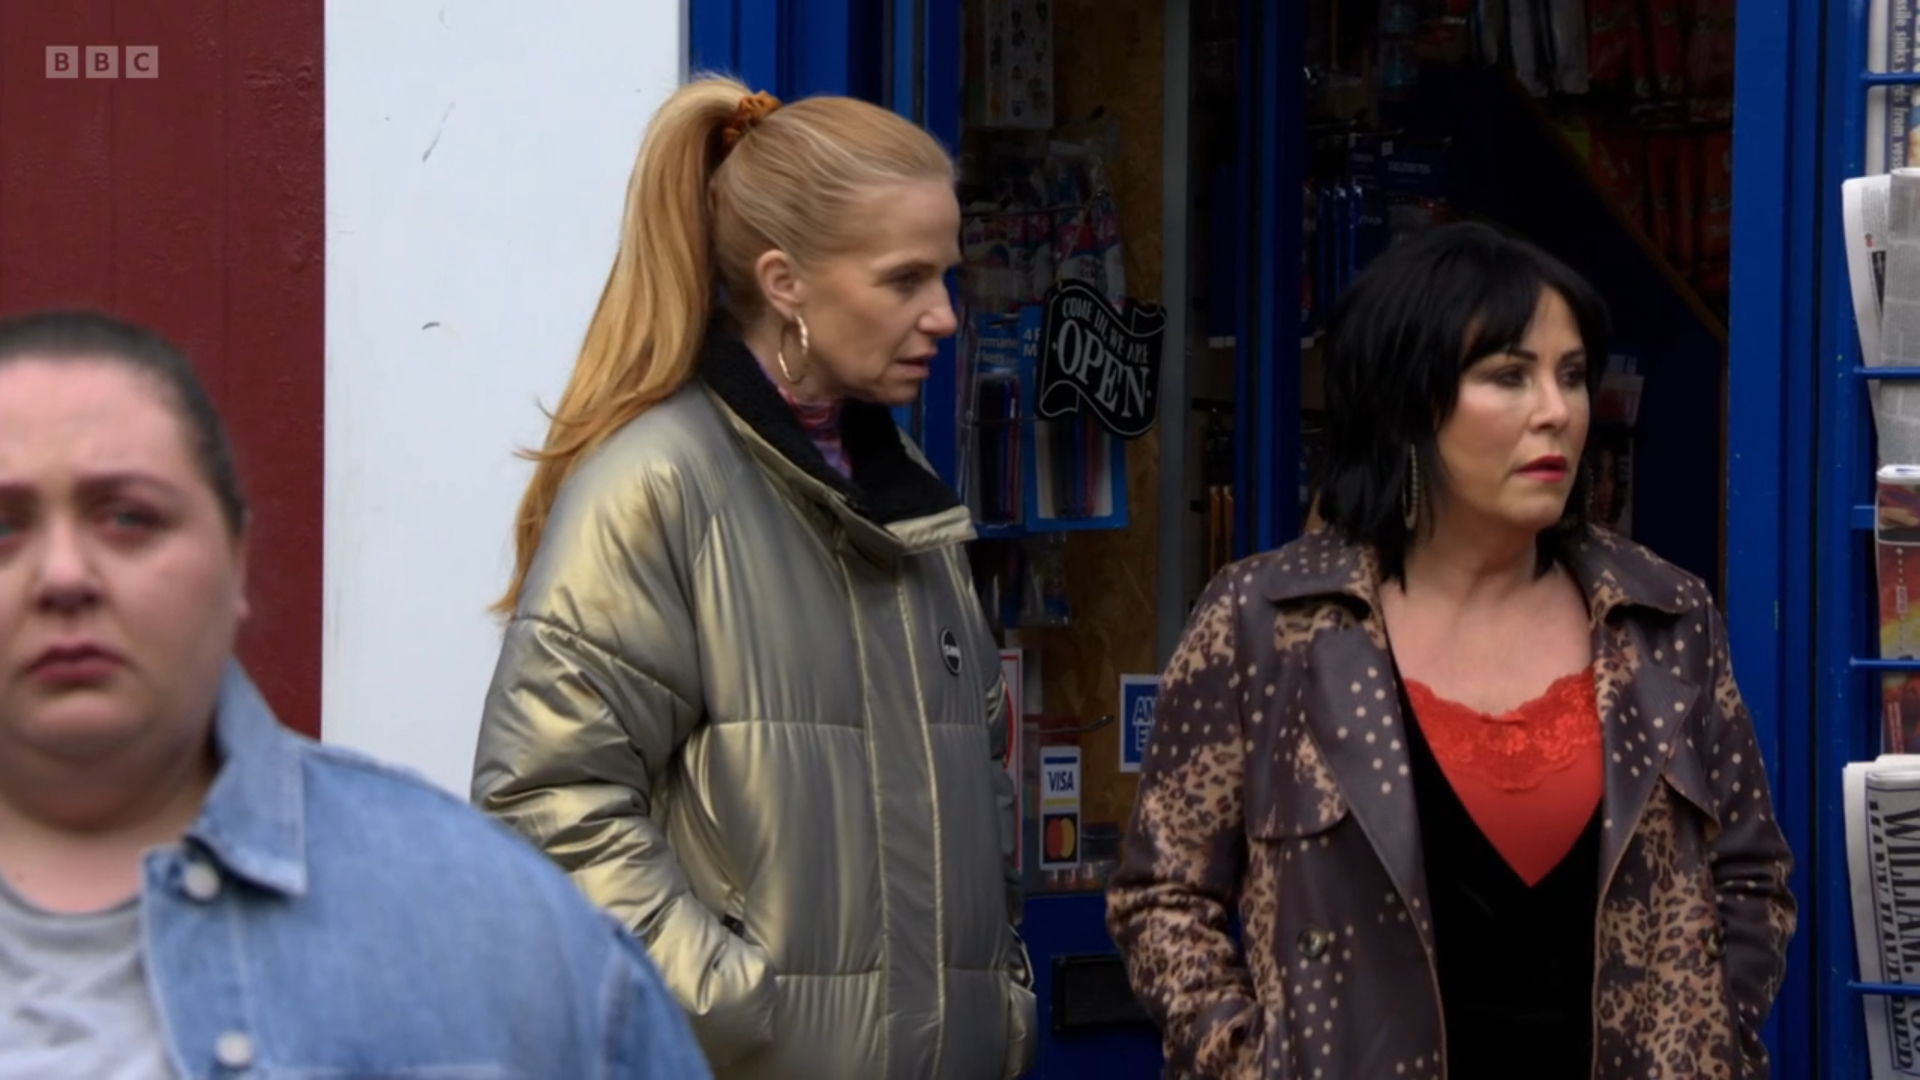 Bianca Jackson and Kat Slater look at a tearful Bernie Taylor as they walk out of the shop.